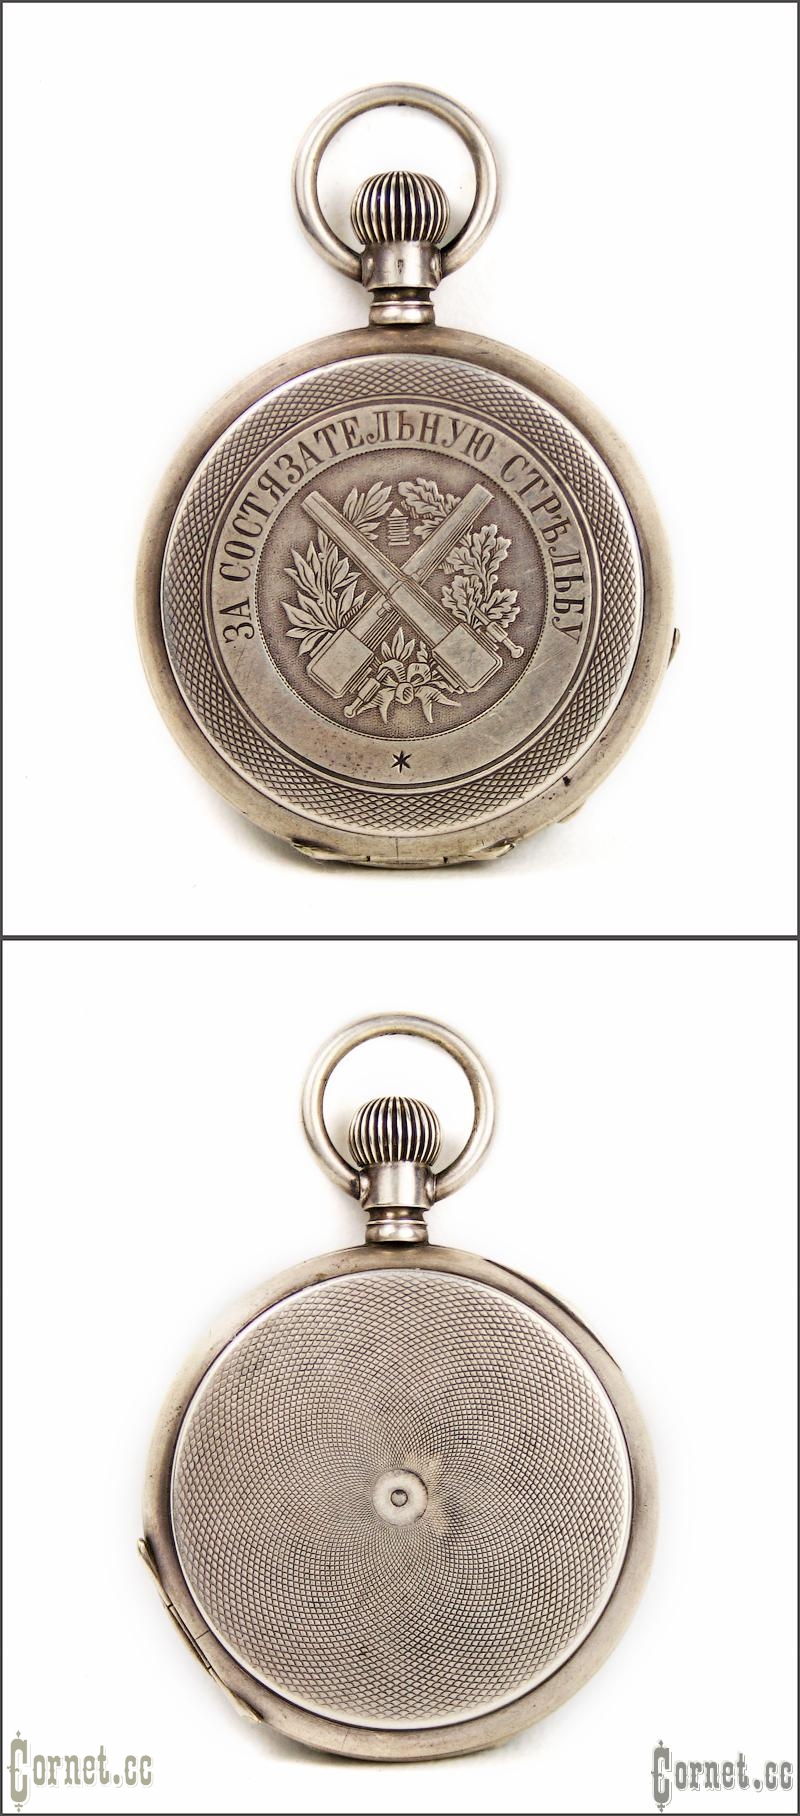 Prize-winning pocket watch for competitive firing in artillery